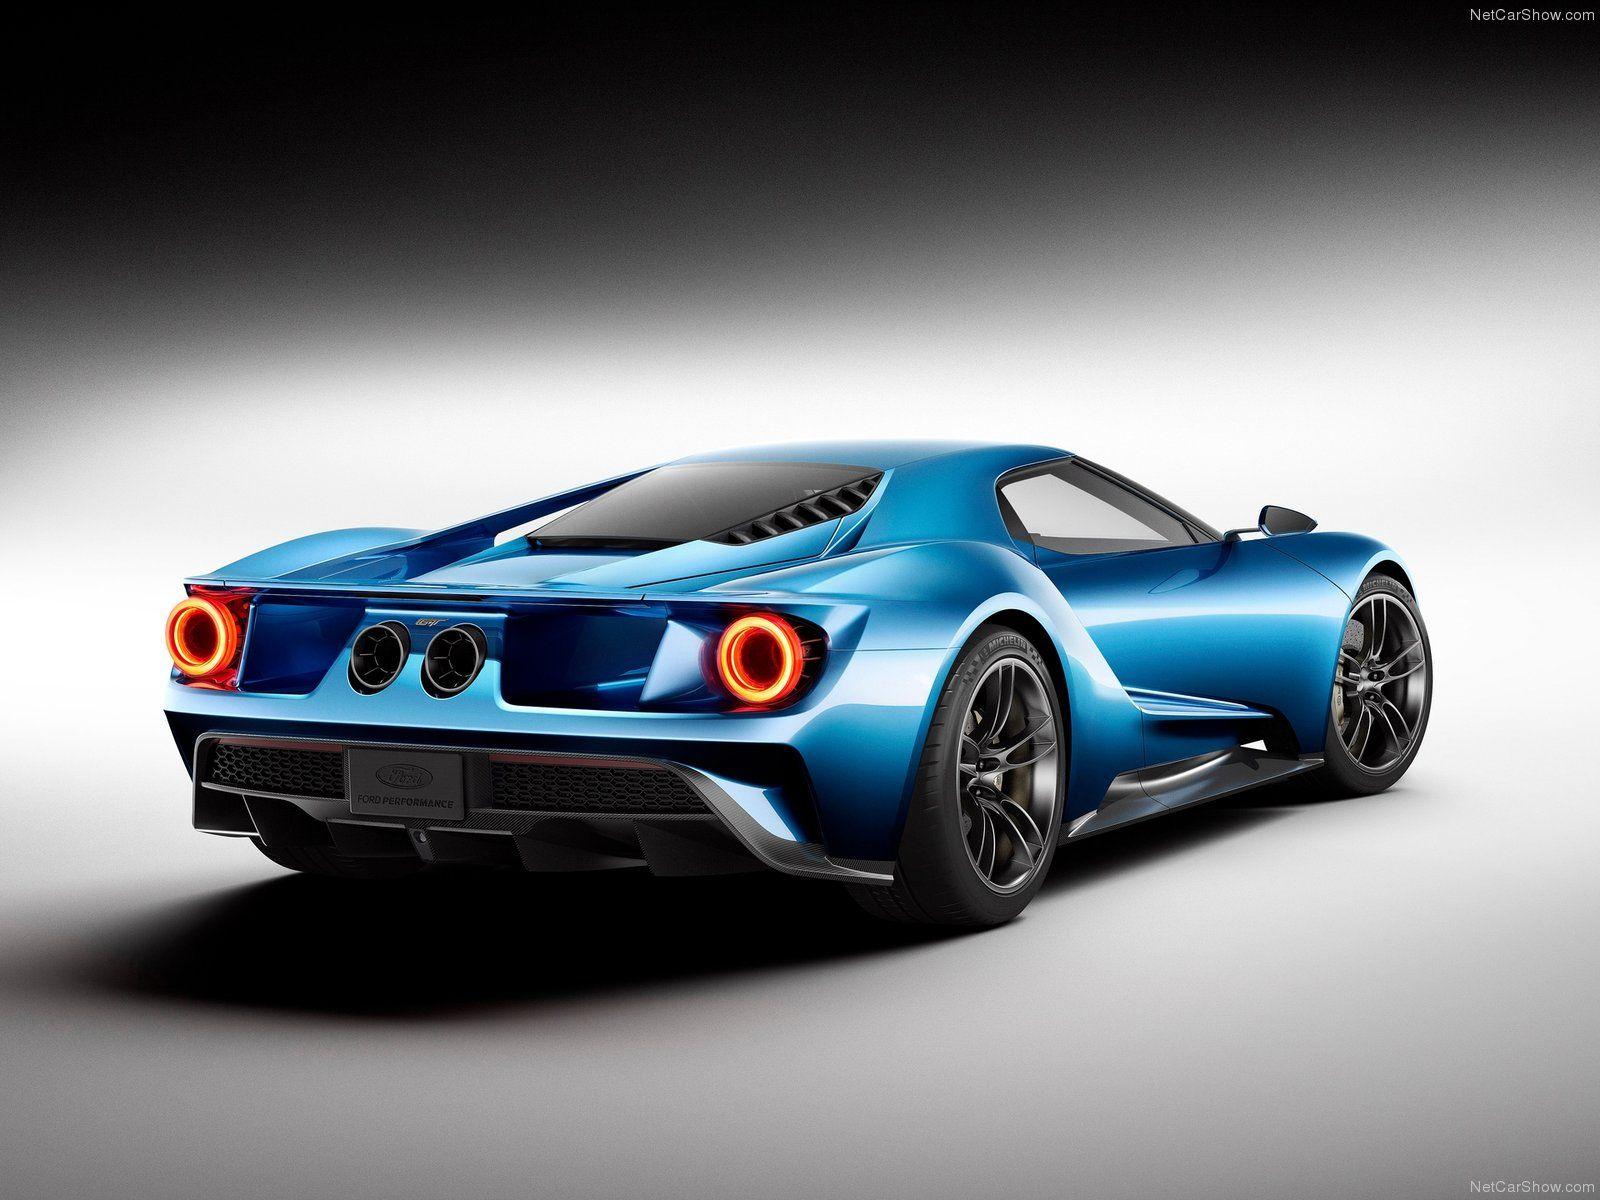 V.826: Ford GT 2017 Wallpaper, HD Image of Ford GT Ultra HD